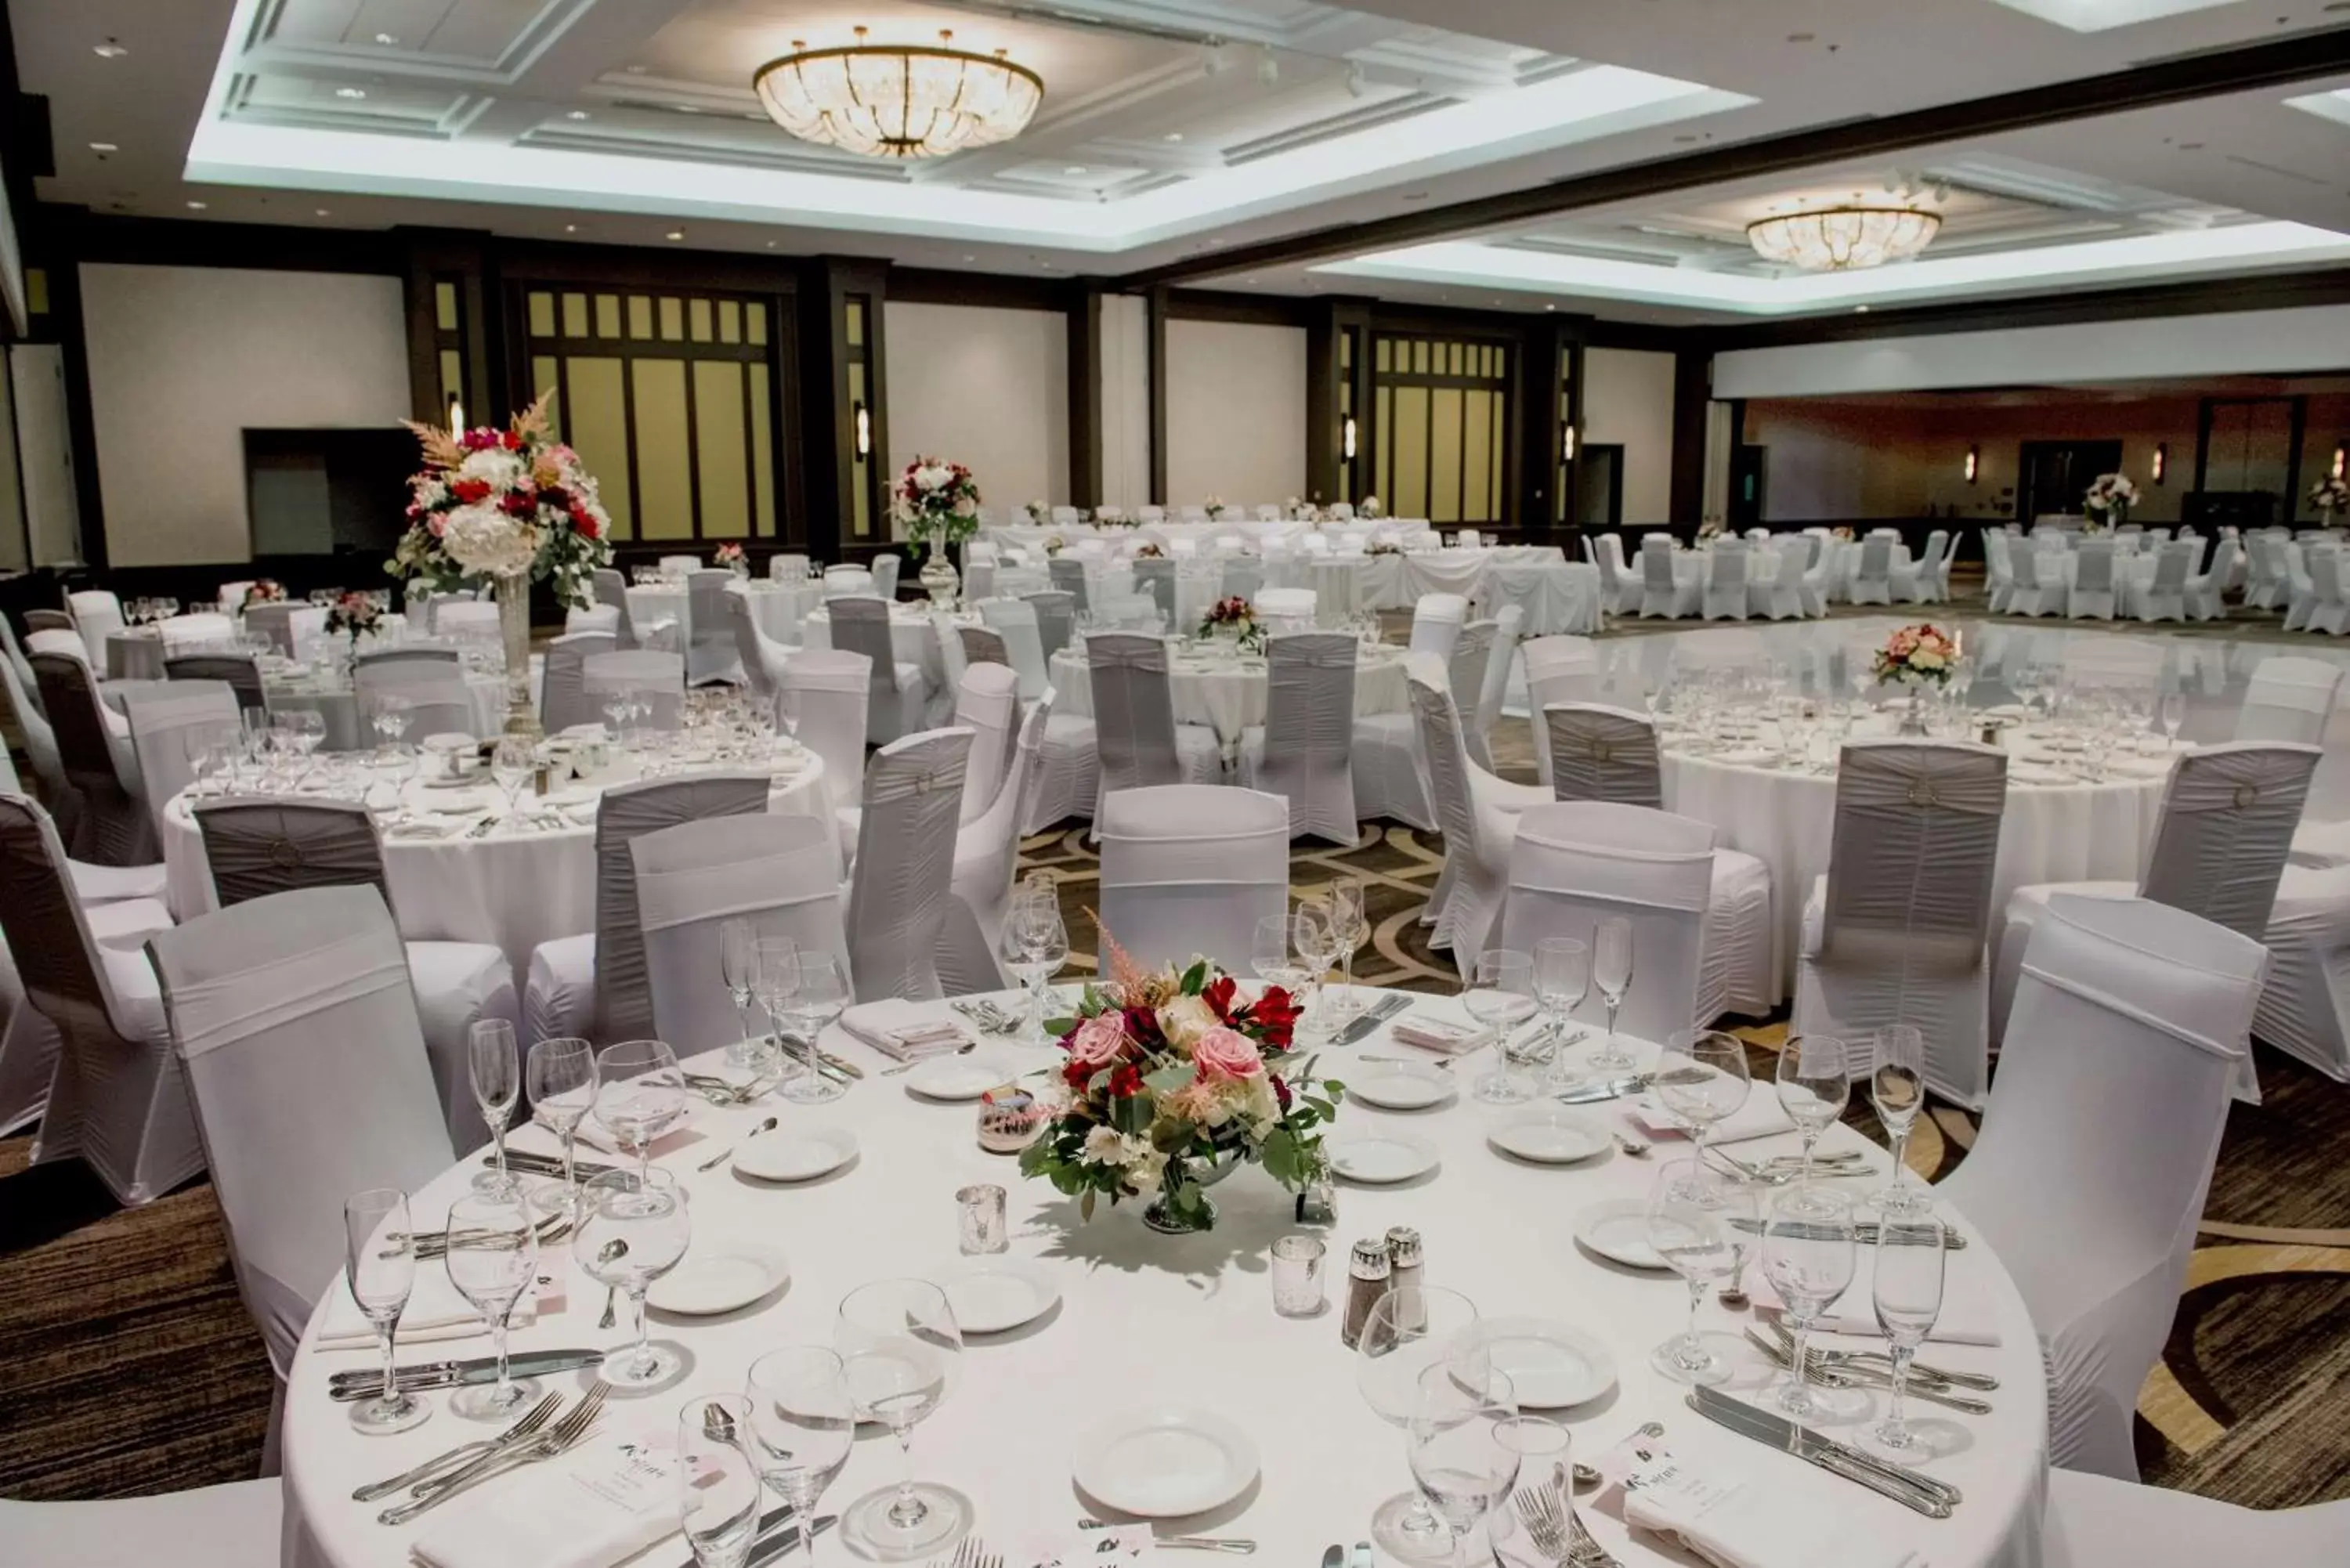 Meeting/conference room, Banquet Facilities in Hilton Chicago Oak Brook Hills Resort & Conference Center